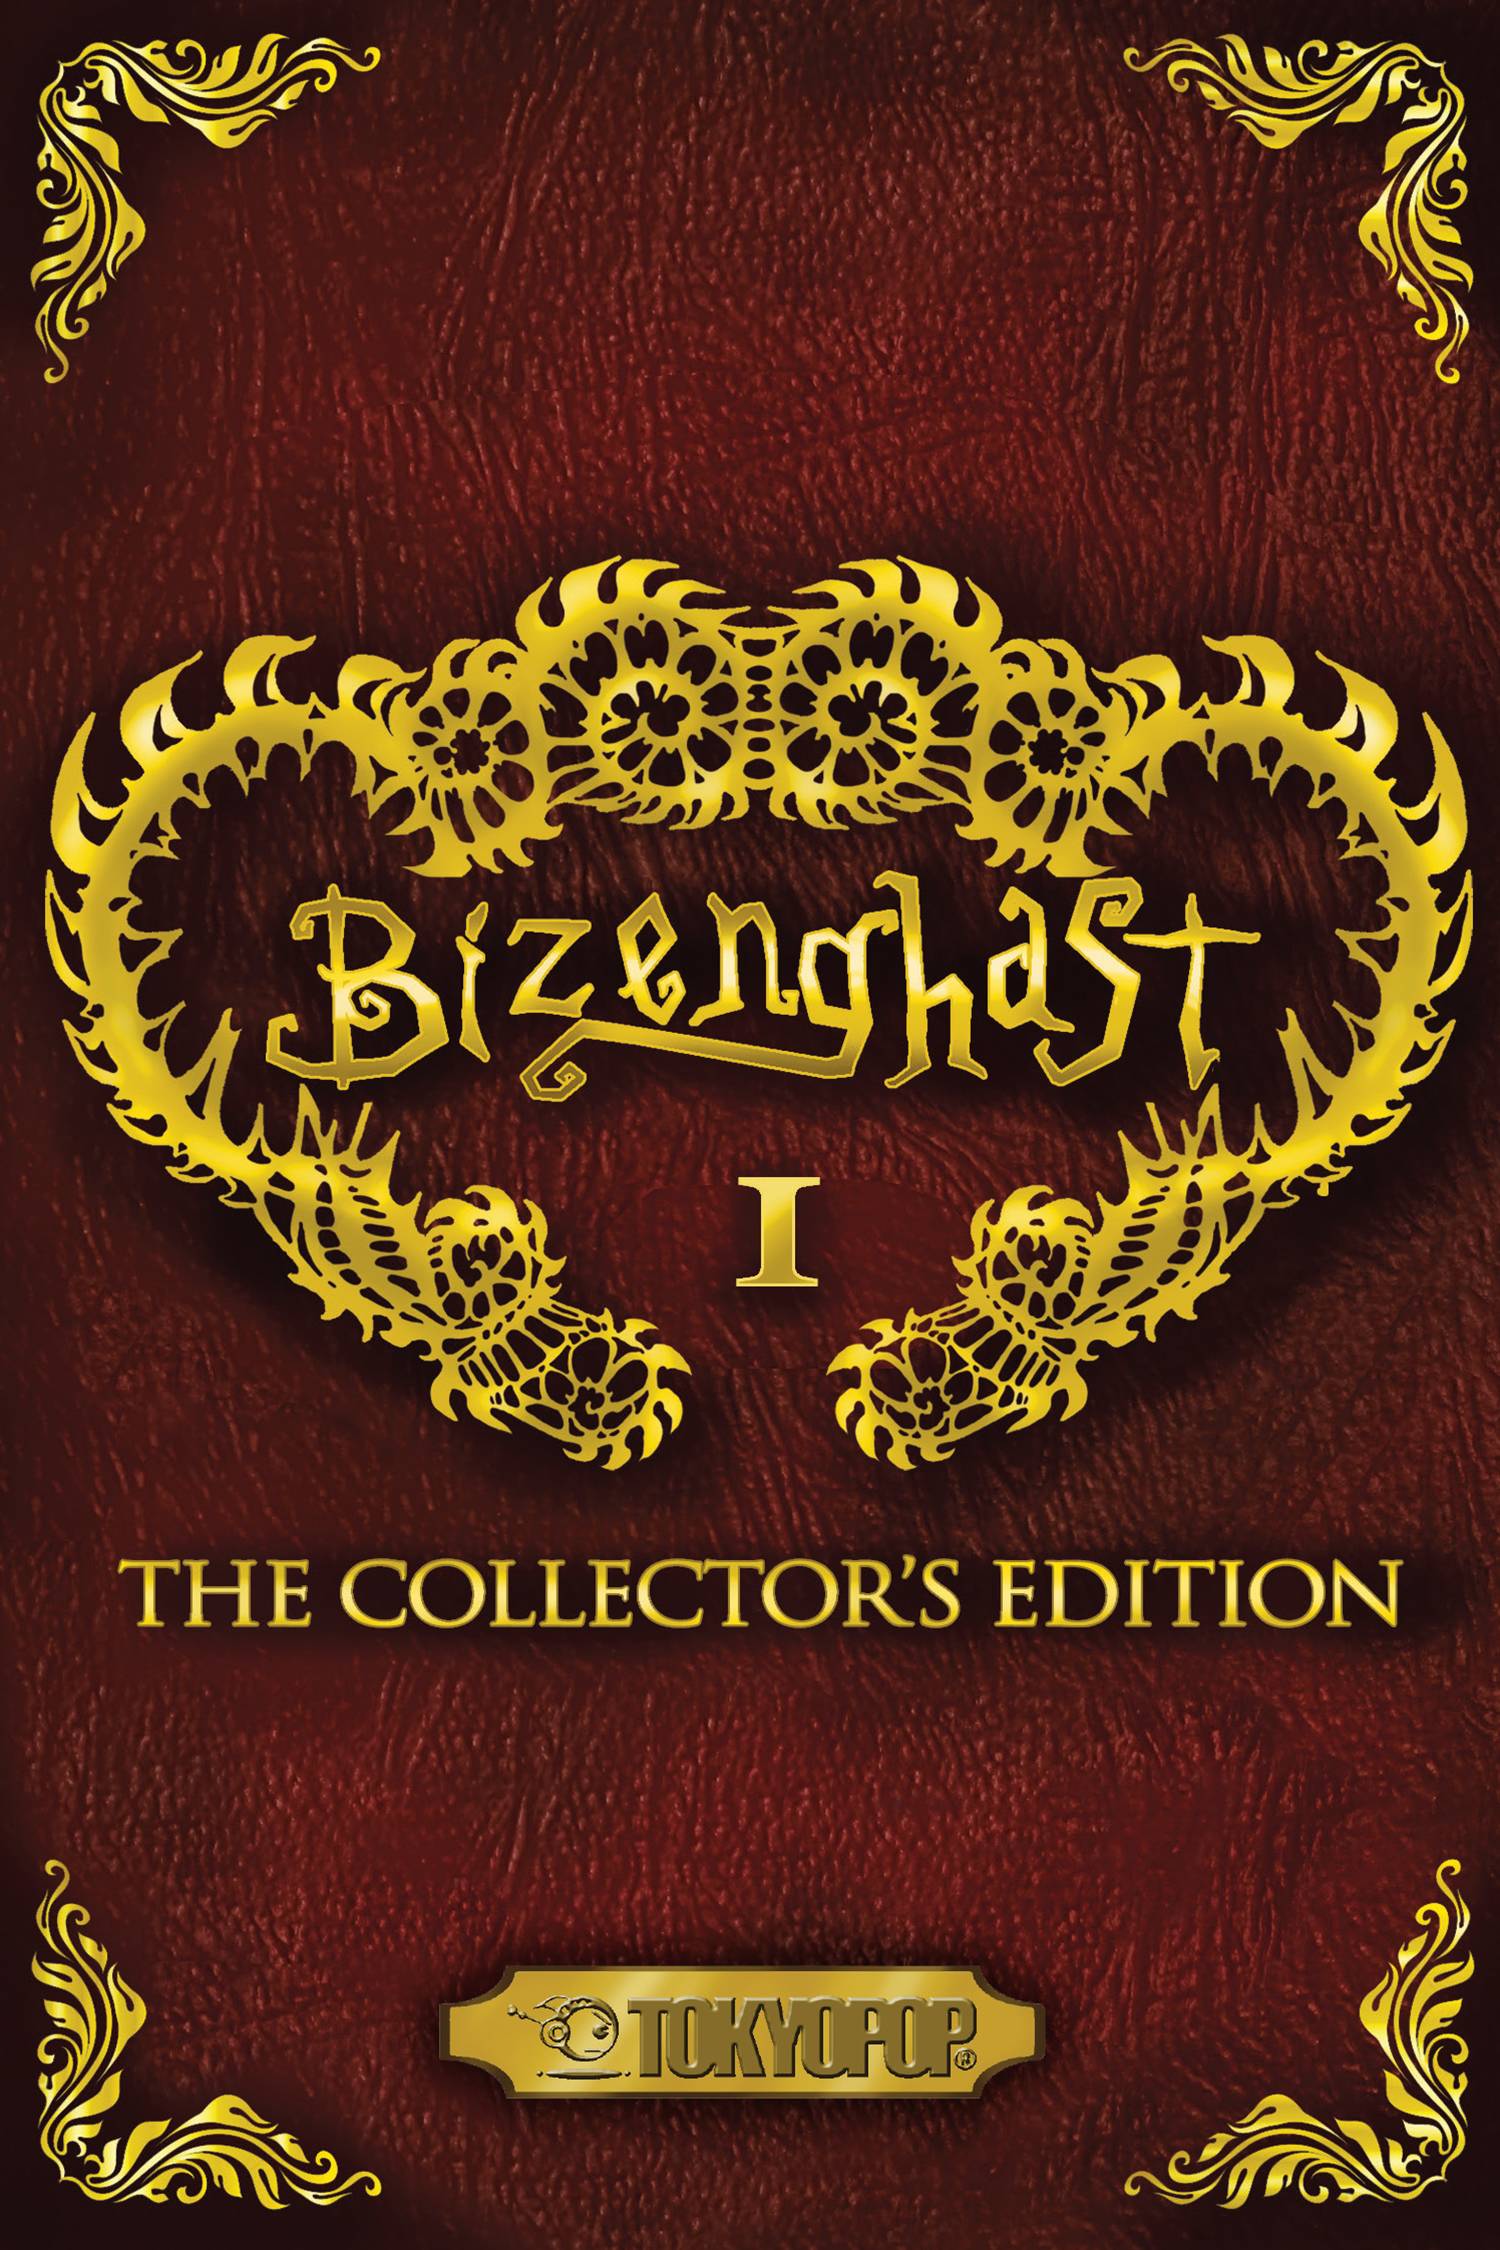 BIZENGHAST 3IN1 GN VOL 01 SPECIAL COLLECTOR ED (SEP162010)